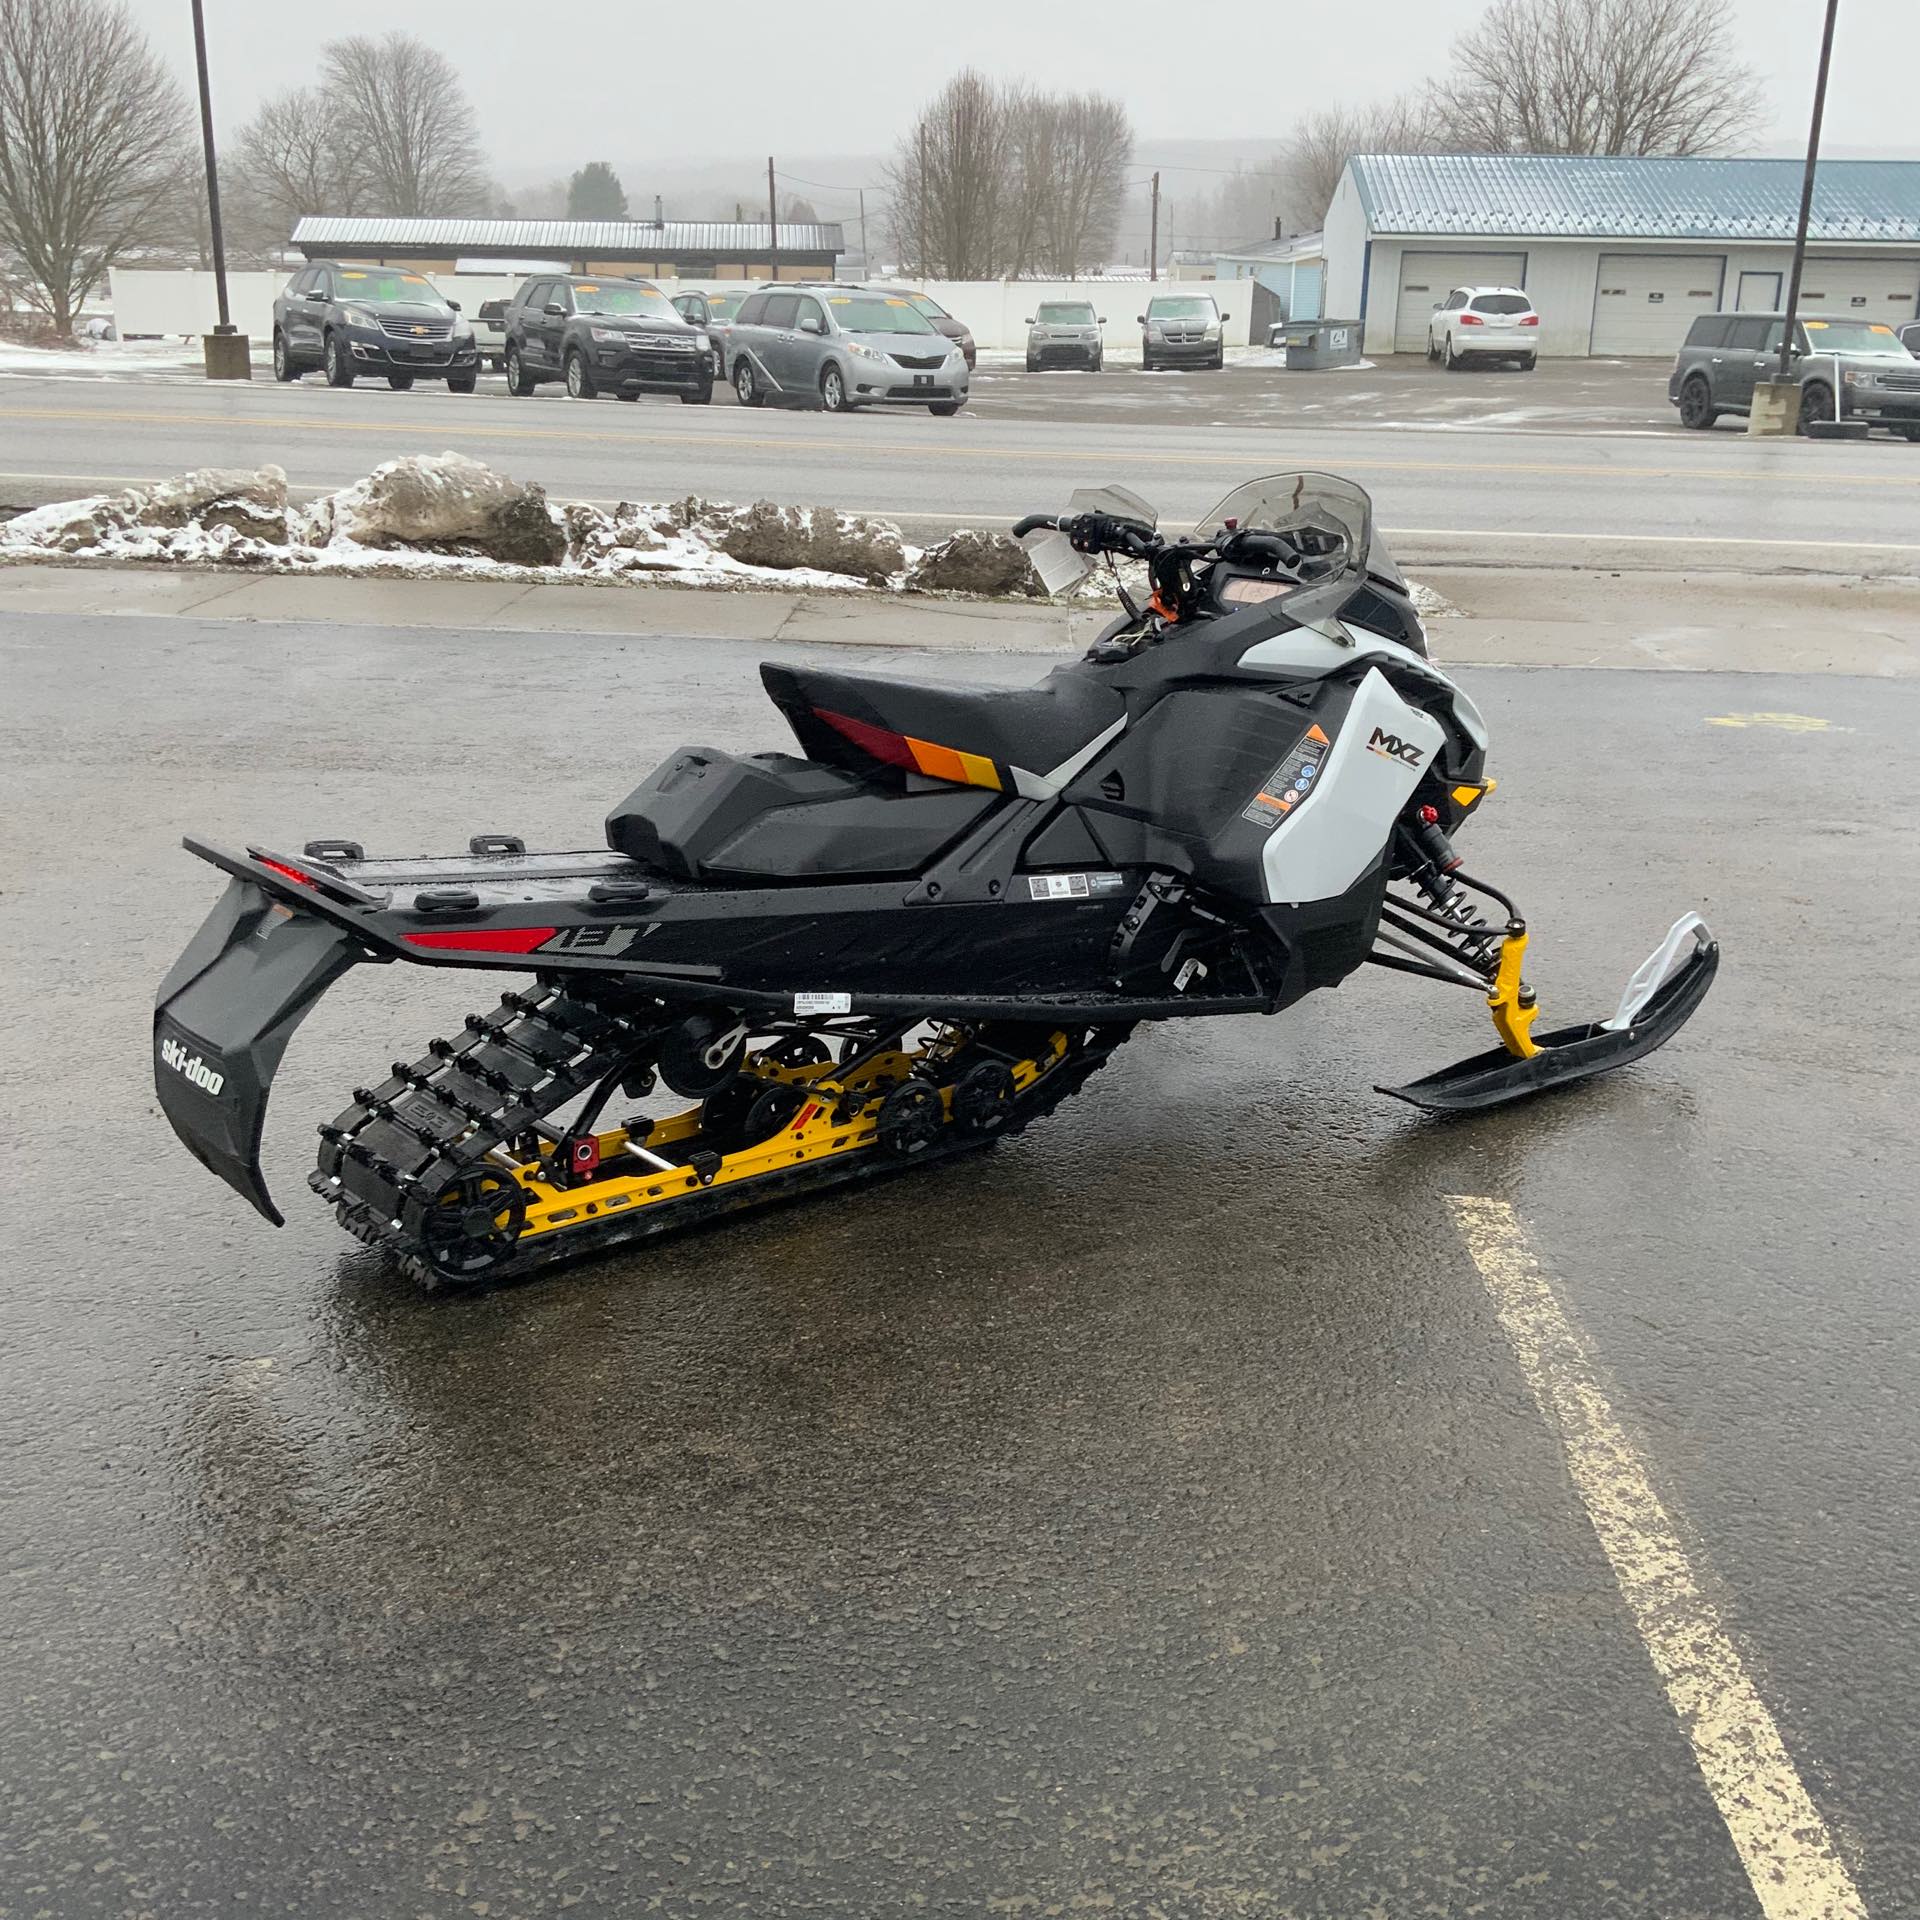 2024 Ski-Doo MXZ Adrenaline With Blizzard Package 850 E-TEC 137 15 at Leisure Time Powersports of Corry